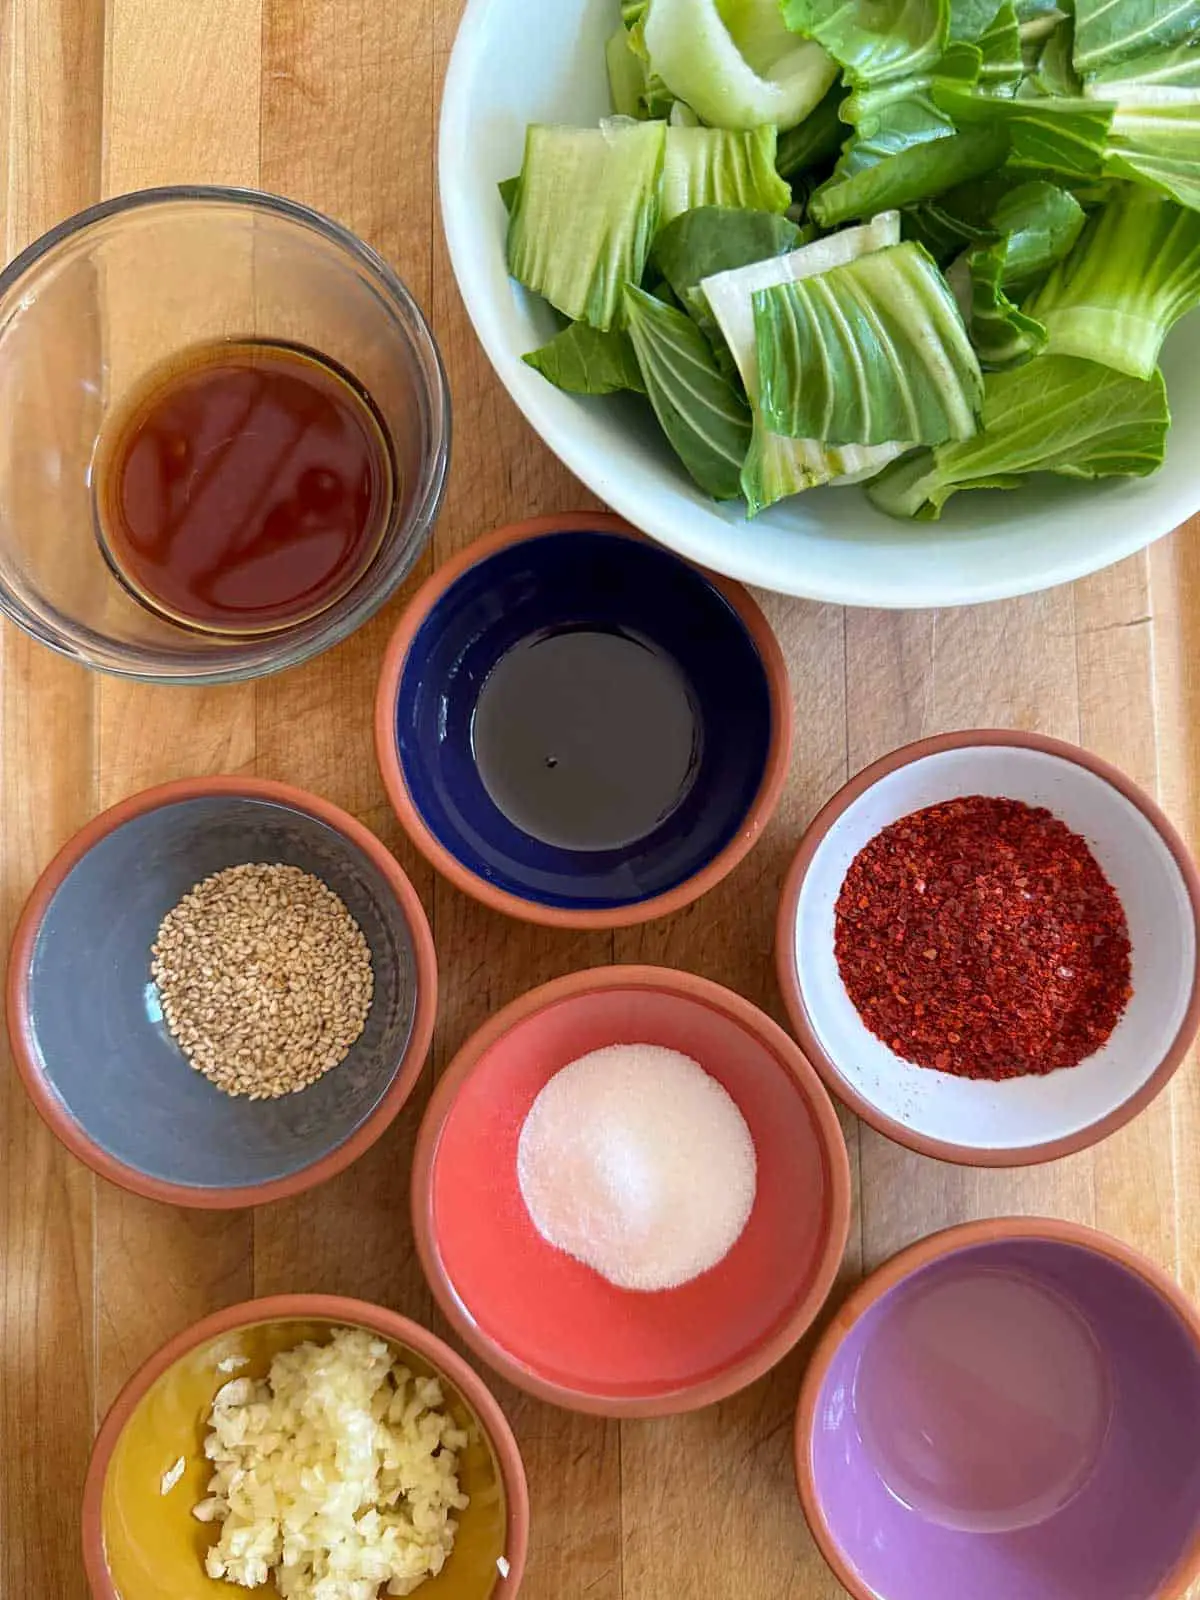 Bowls containing cut up baby bok choy, fish sauce, rice vinegar, sesame oil, sesame seeds, sugar, Korean red pepper flakes, and minced garlic.